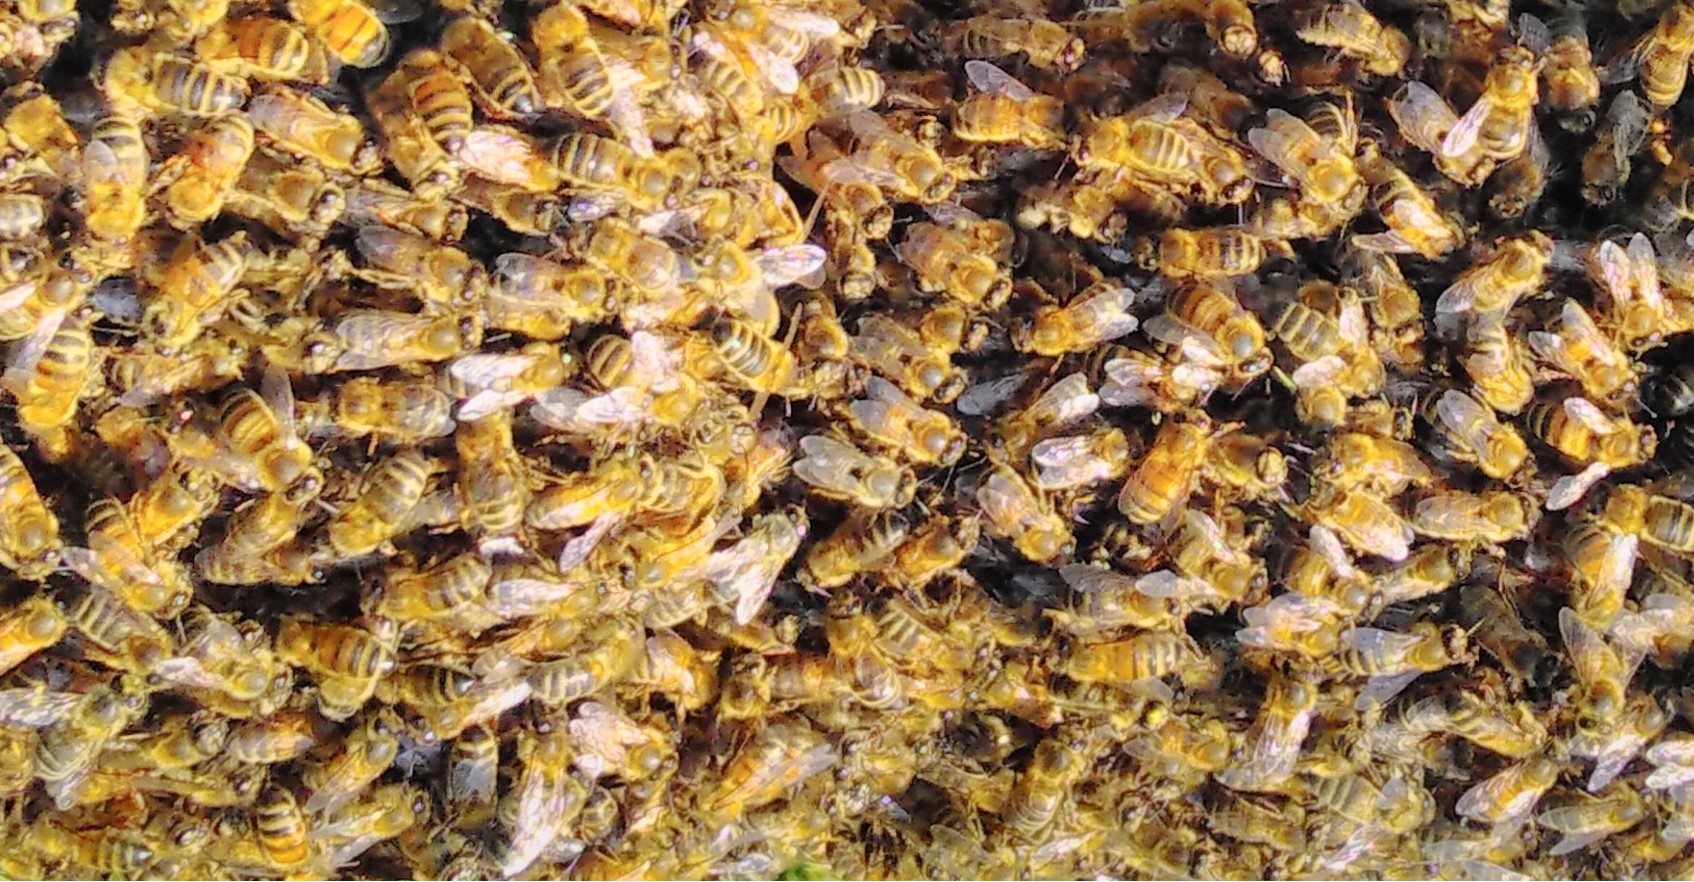 <h2>Bees</h2><div class='slide-content'><p><span class='highlight'>You can keep bees in our apiary, subject to training and safeguards</span></p></div><a href='/beekeepers/' class='btn' title='Read more'>Read more</a>